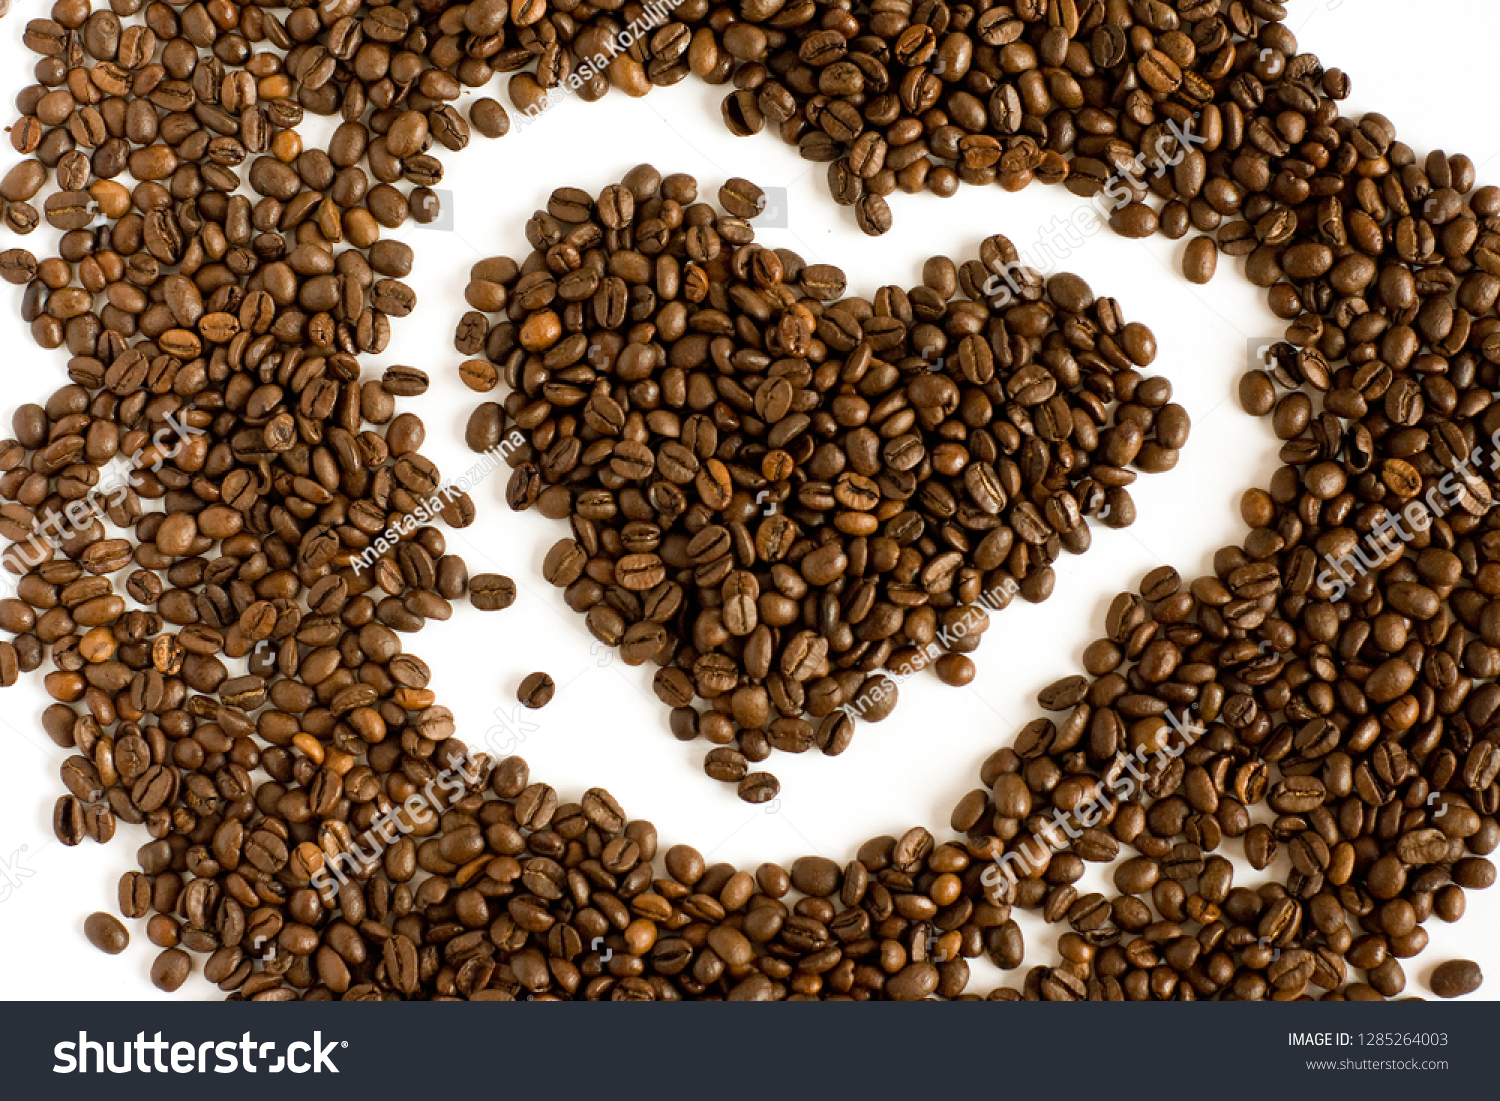 heart of many fresh coffee beans isolated view from above #1285264003